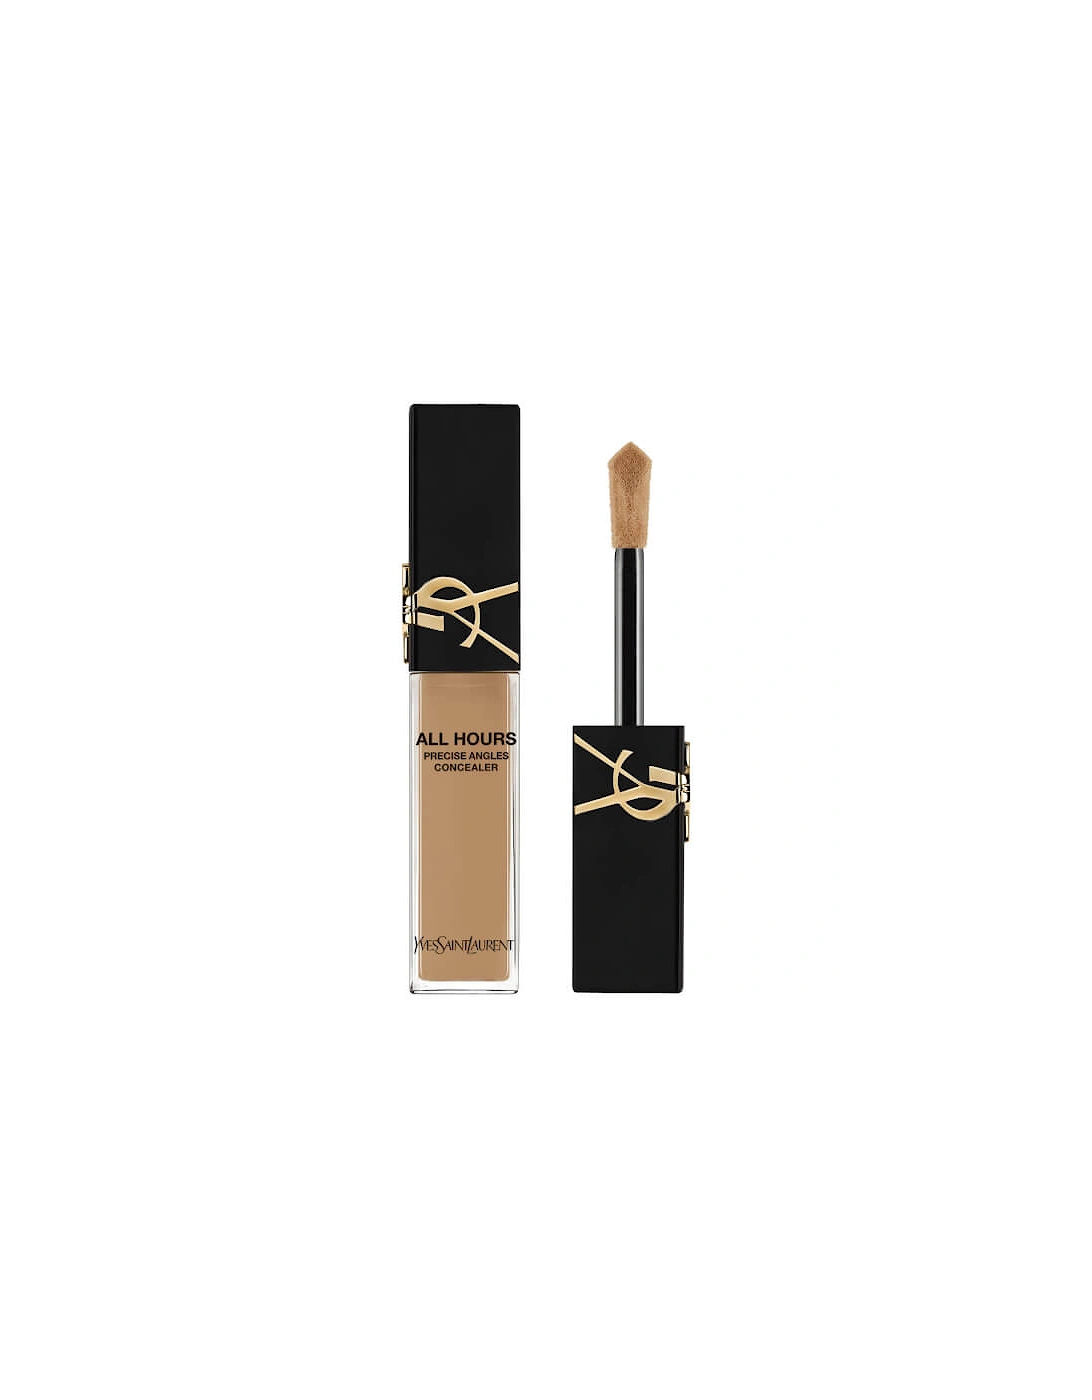 Yves Saint Laurent All Hours Concealer - MN7, 2 of 1